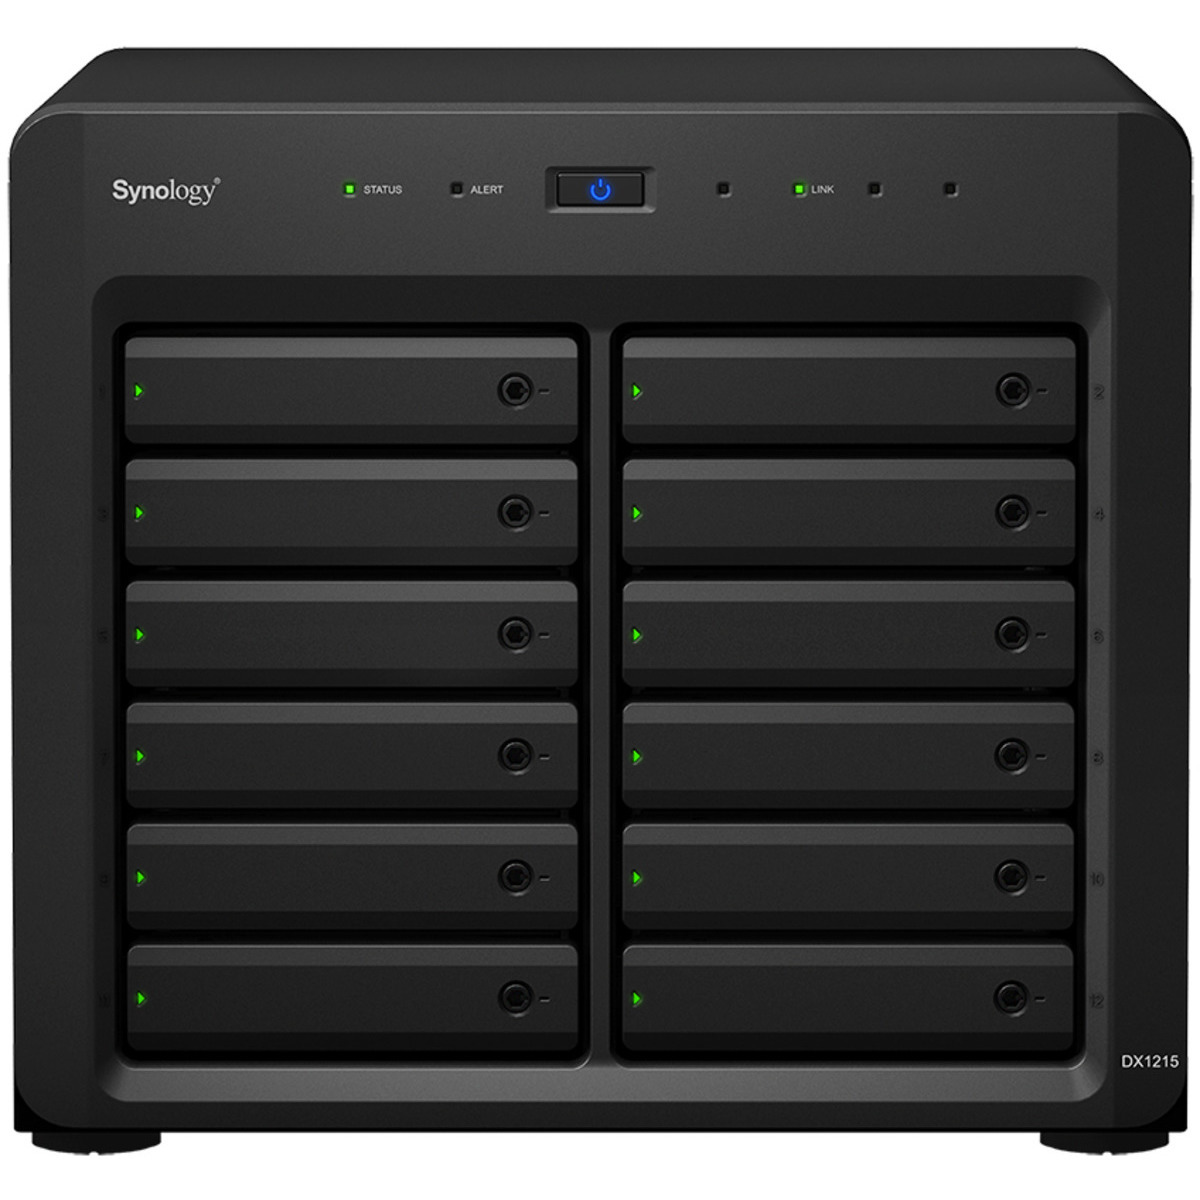 Synology DX1215II External Expansion Drive 96tb 12-Bay Desktop Multimedia / Power User / Business Expansion Enclosure 12x8tb Seagate IronWolf Pro ST8000NT001 3.5 7200rpm SATA 6Gb/s HDD NAS Class Drives Installed - Burn-In Tested - ON SALE DX1215II External Expansion Drive